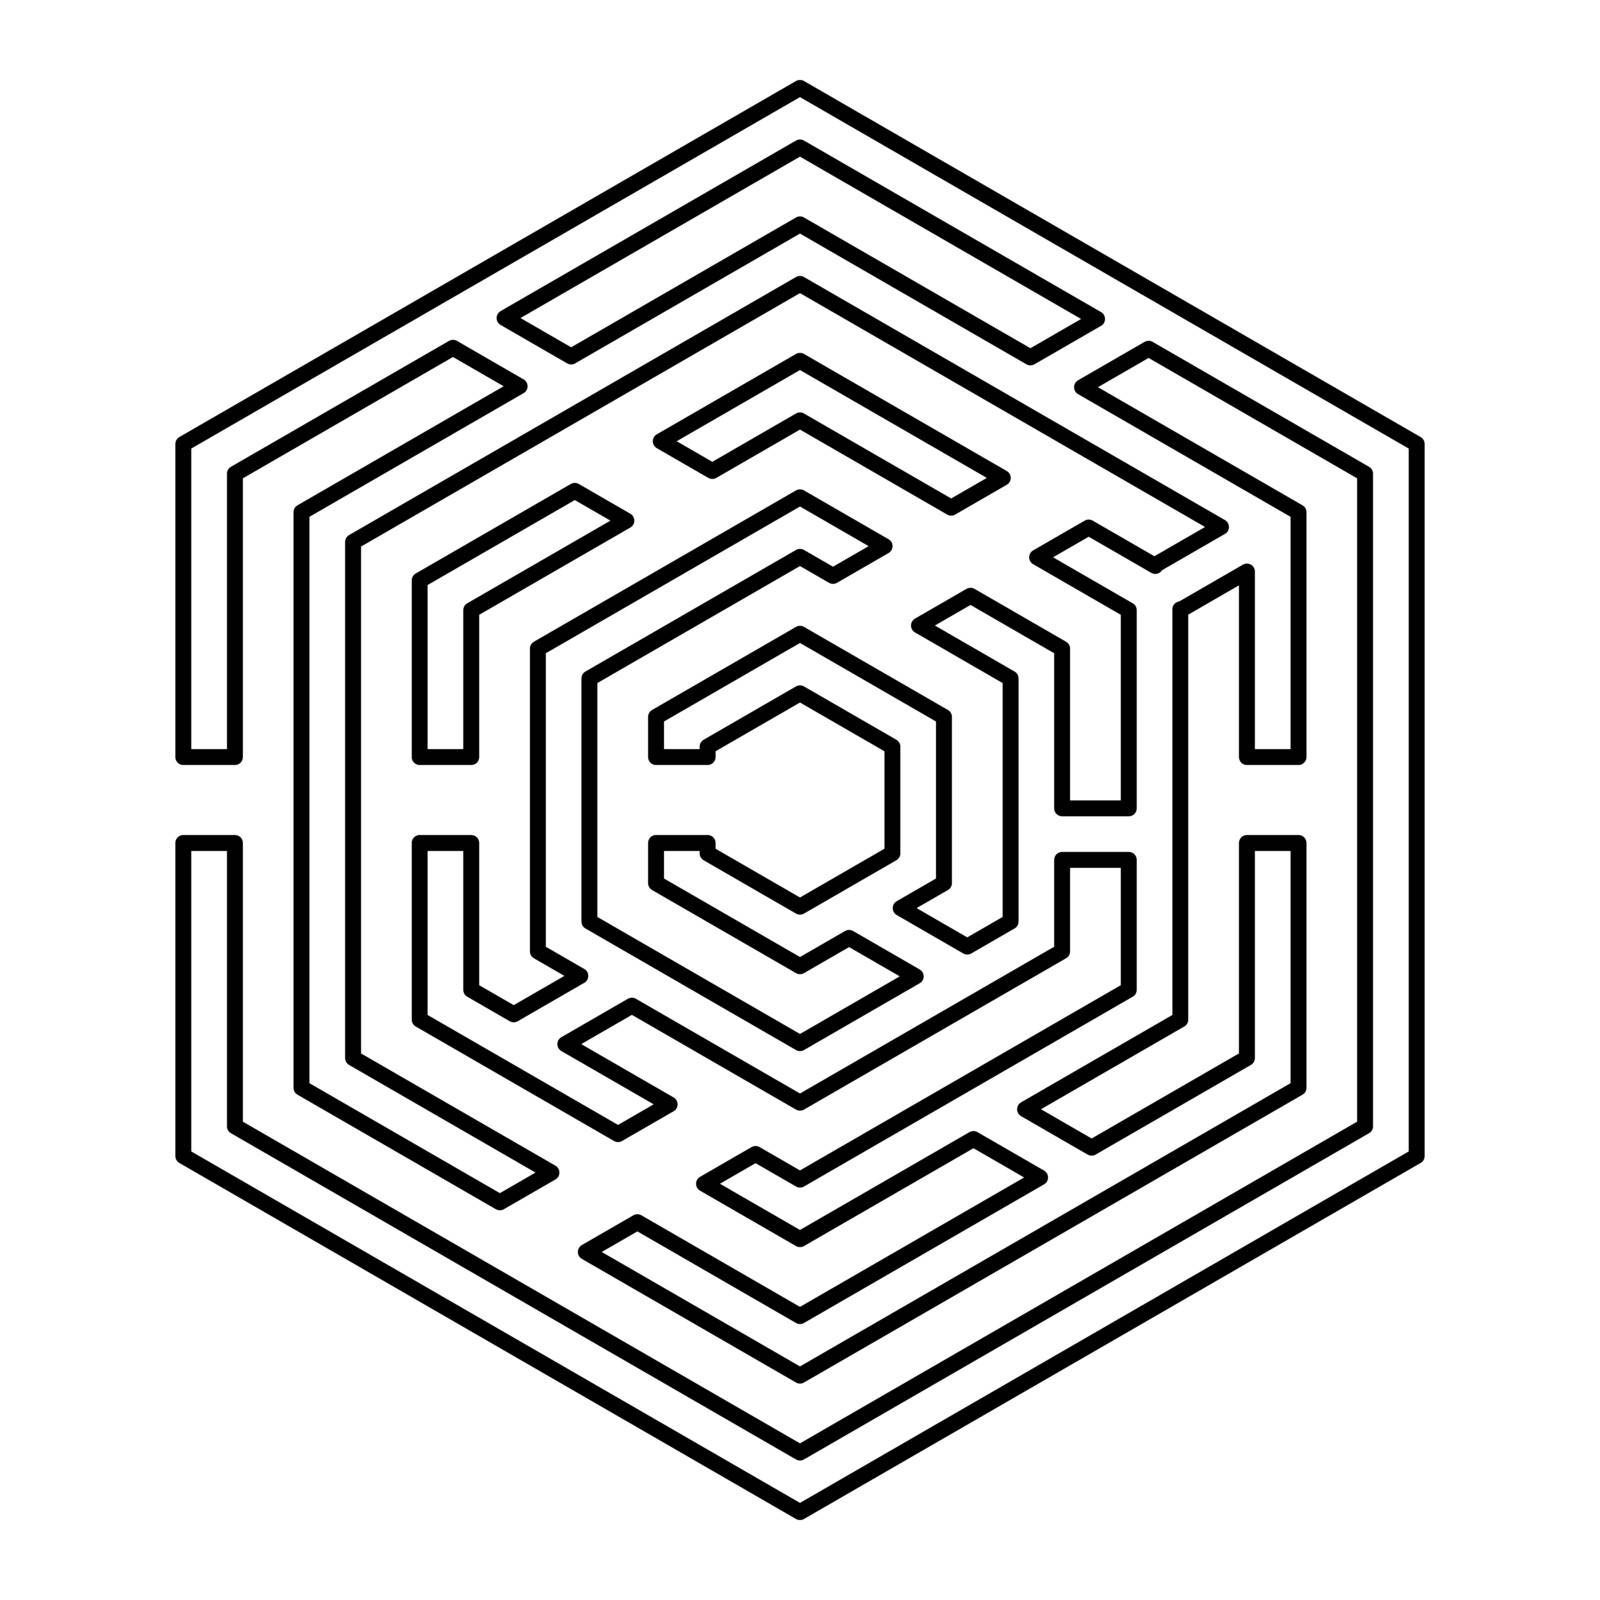 Hexagonal Maze Hexagon maze Labyrinth with six corner icon black color outline vector illustration flat style simple image